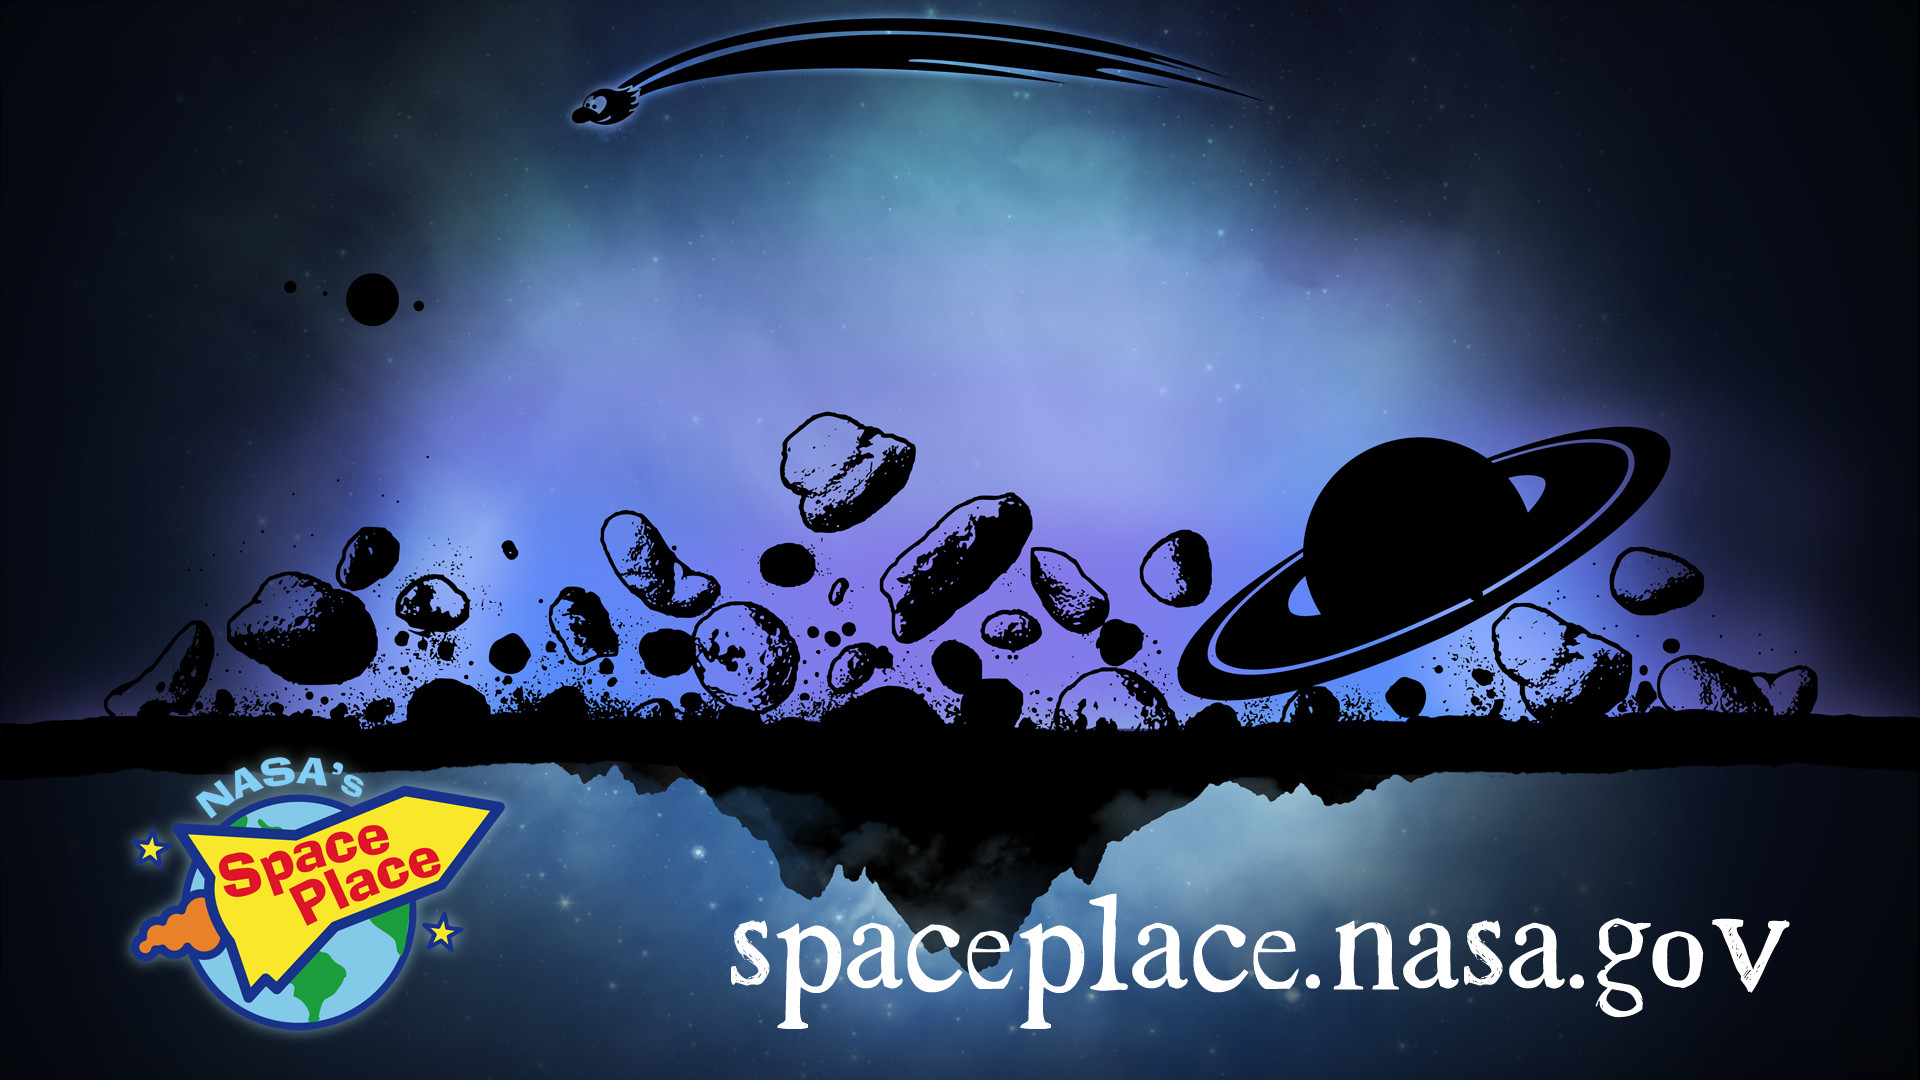 1920x1080 Download Space Place wallpaper for your computer!